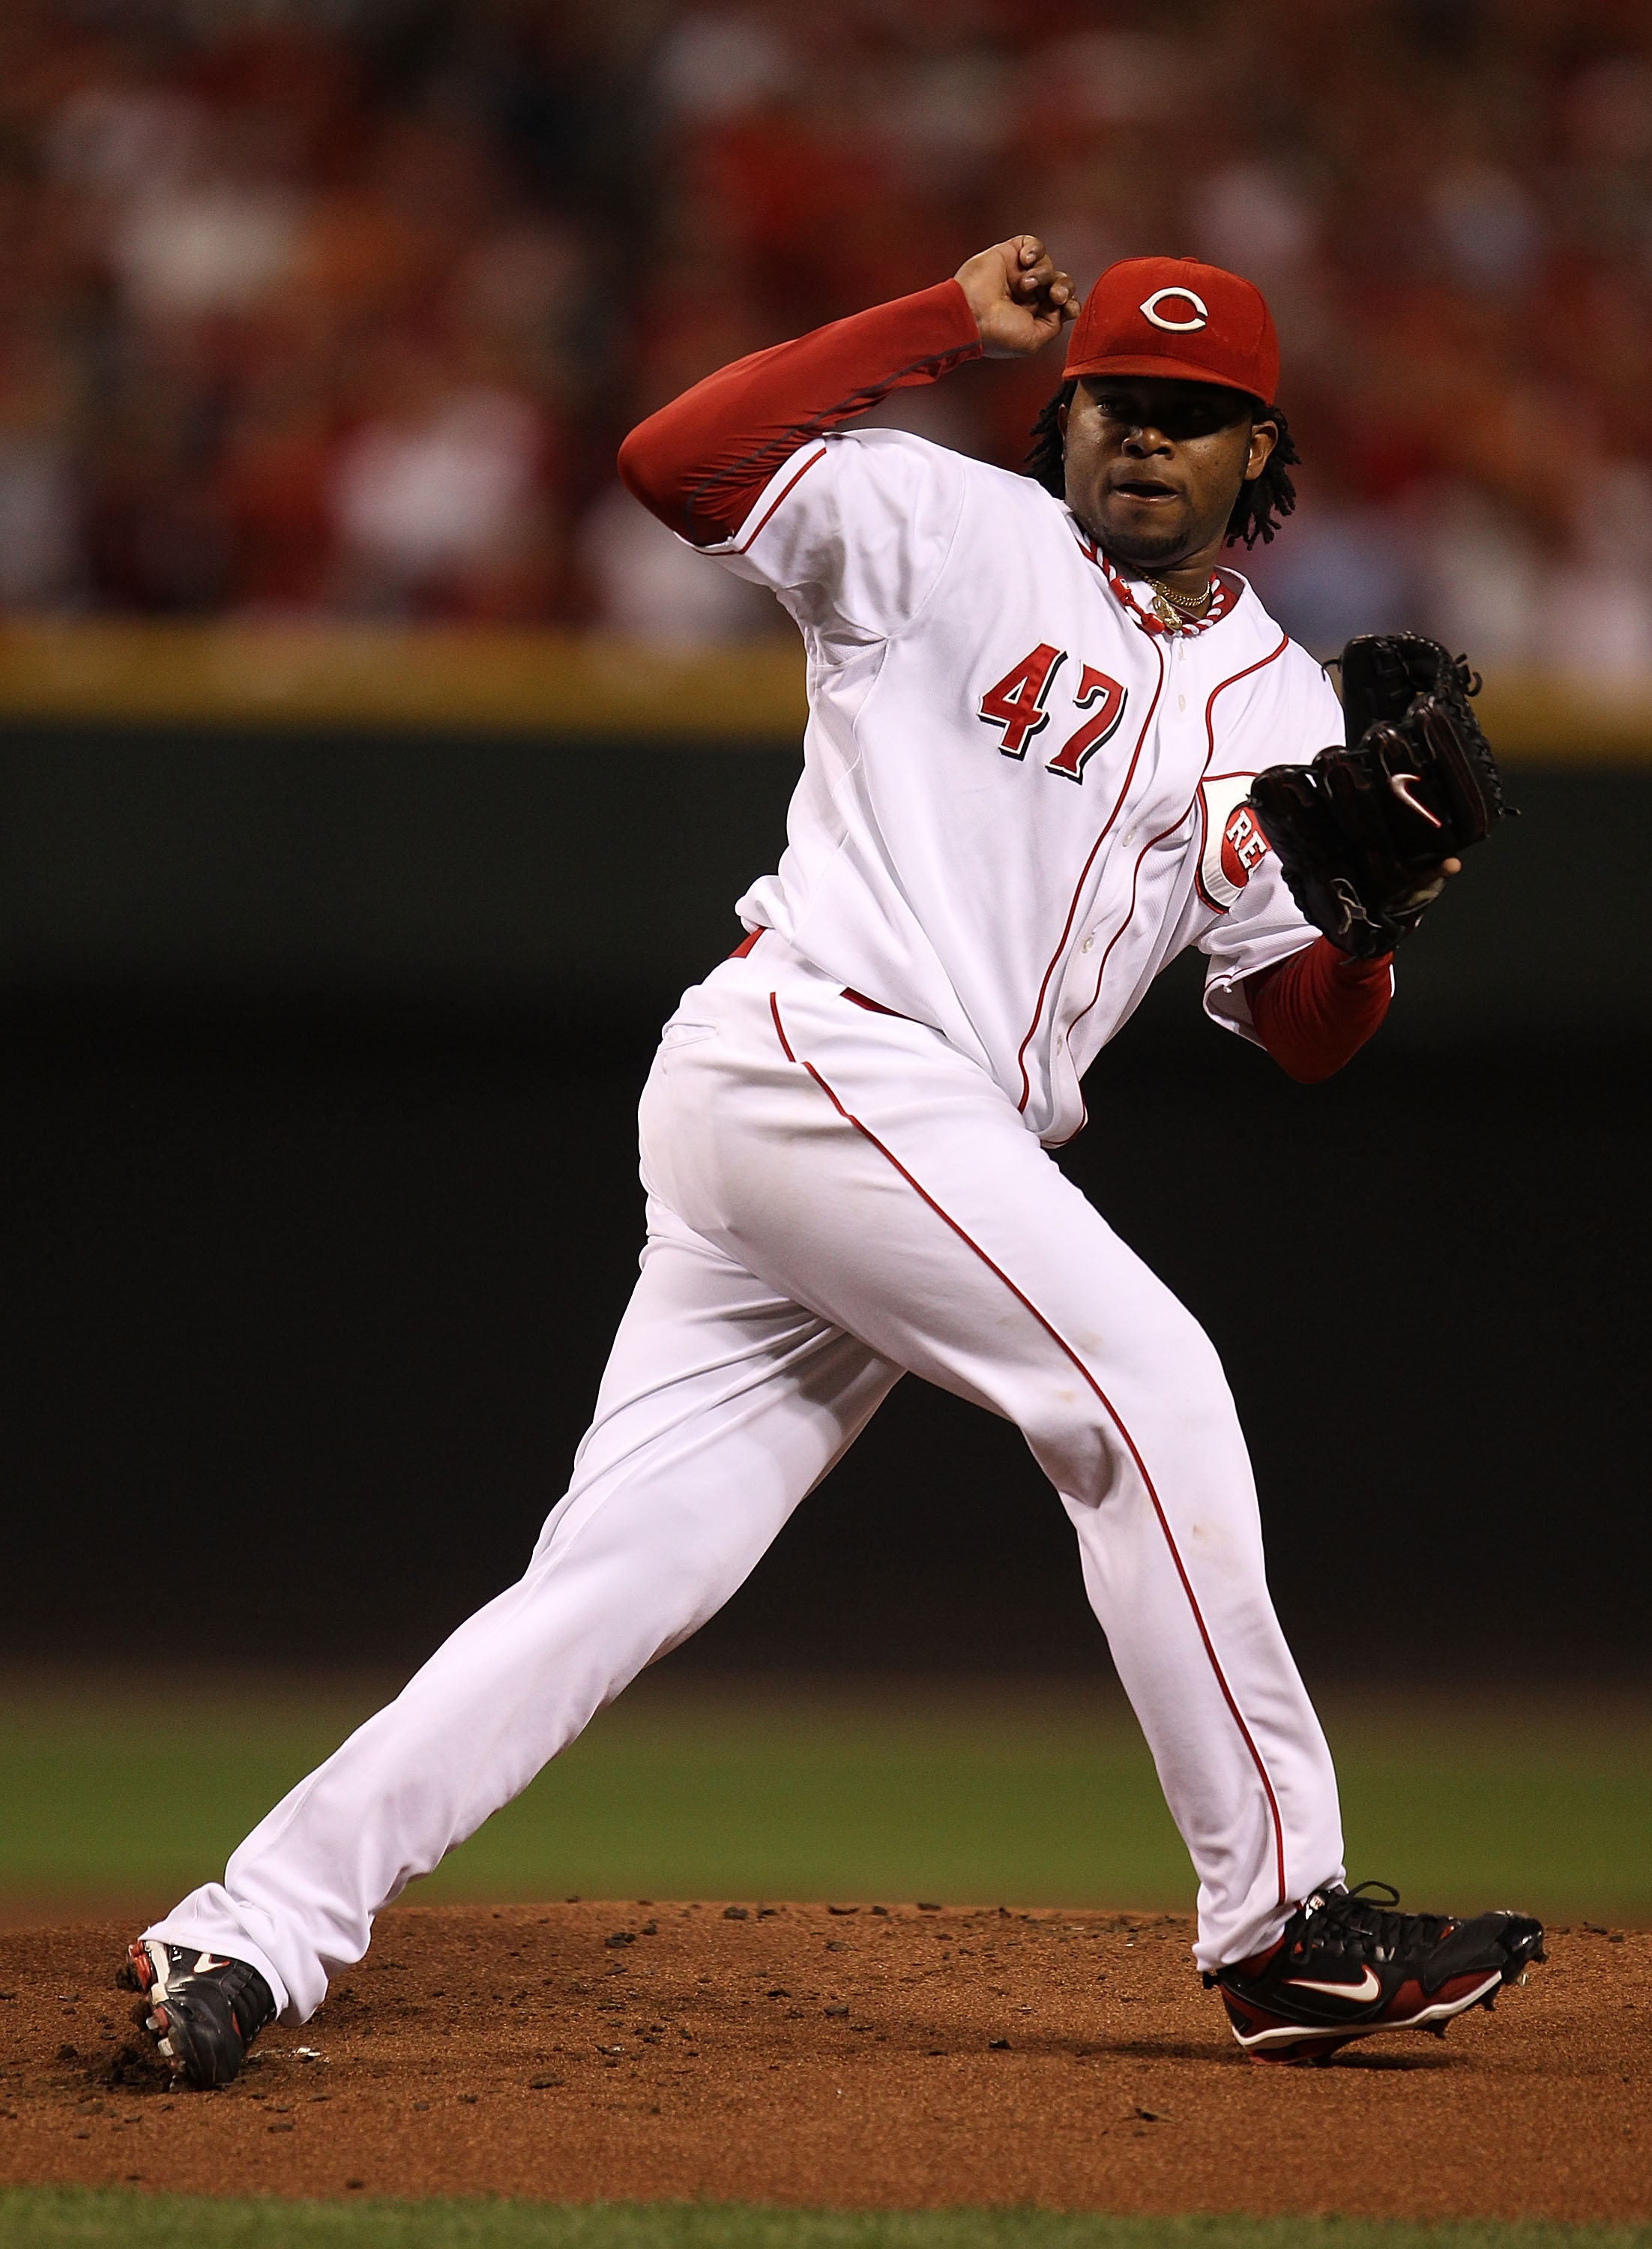 CINCINNATI - OCTOBER 10: Starting pitcher Johnny Cueto #47 of the Cincinnati Reds follows through after delivering the ball against the Philadelphia Phillies during game 3 of the NLDS at Great American Ball Park on October 10, 2010 in Cincinnati, Ohio.  T